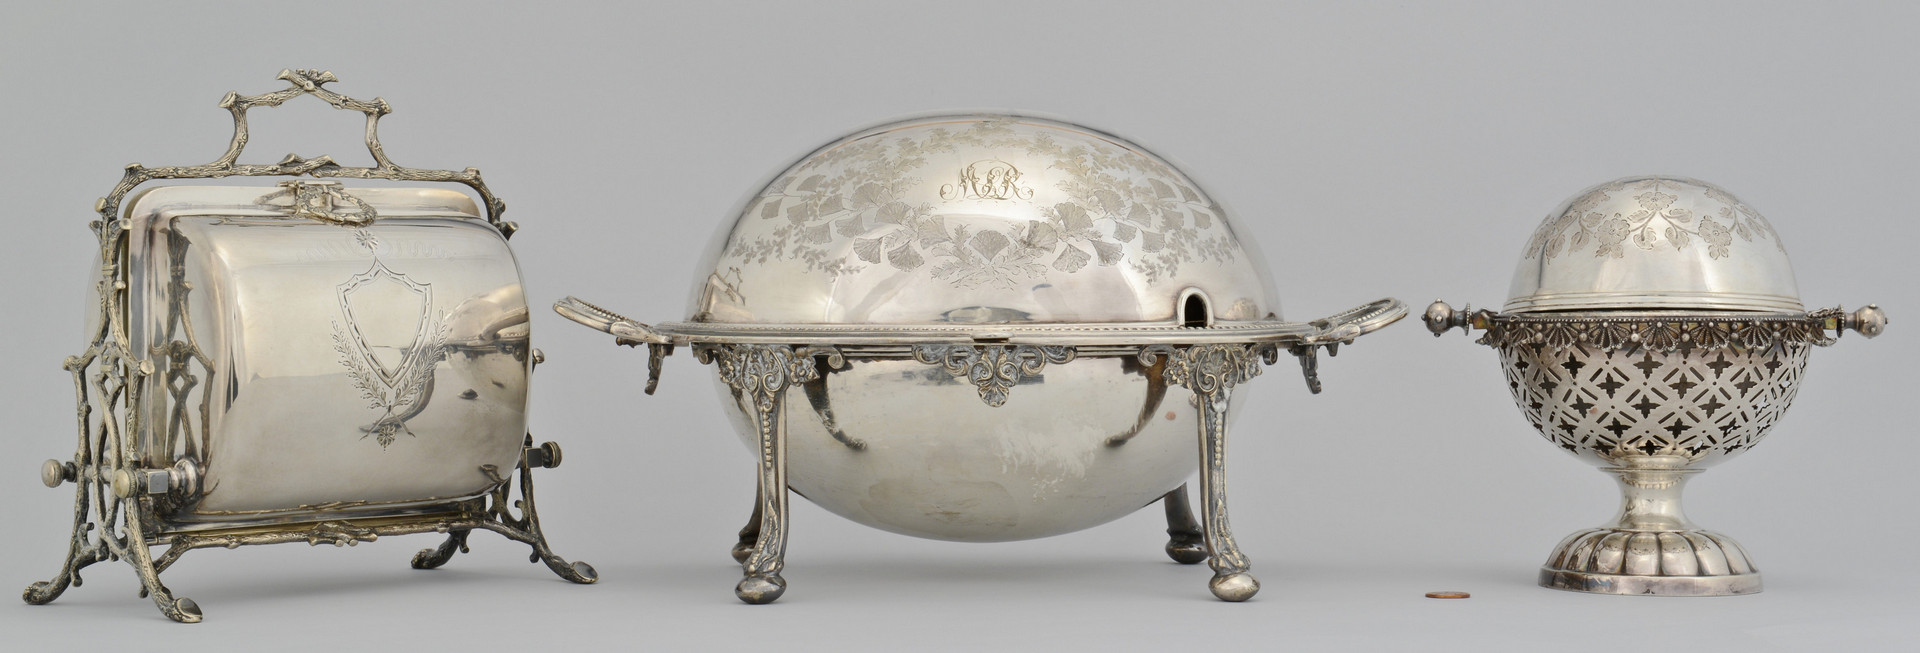 Lot 923: Biscuit Box, Bacon Server, Butter Dome